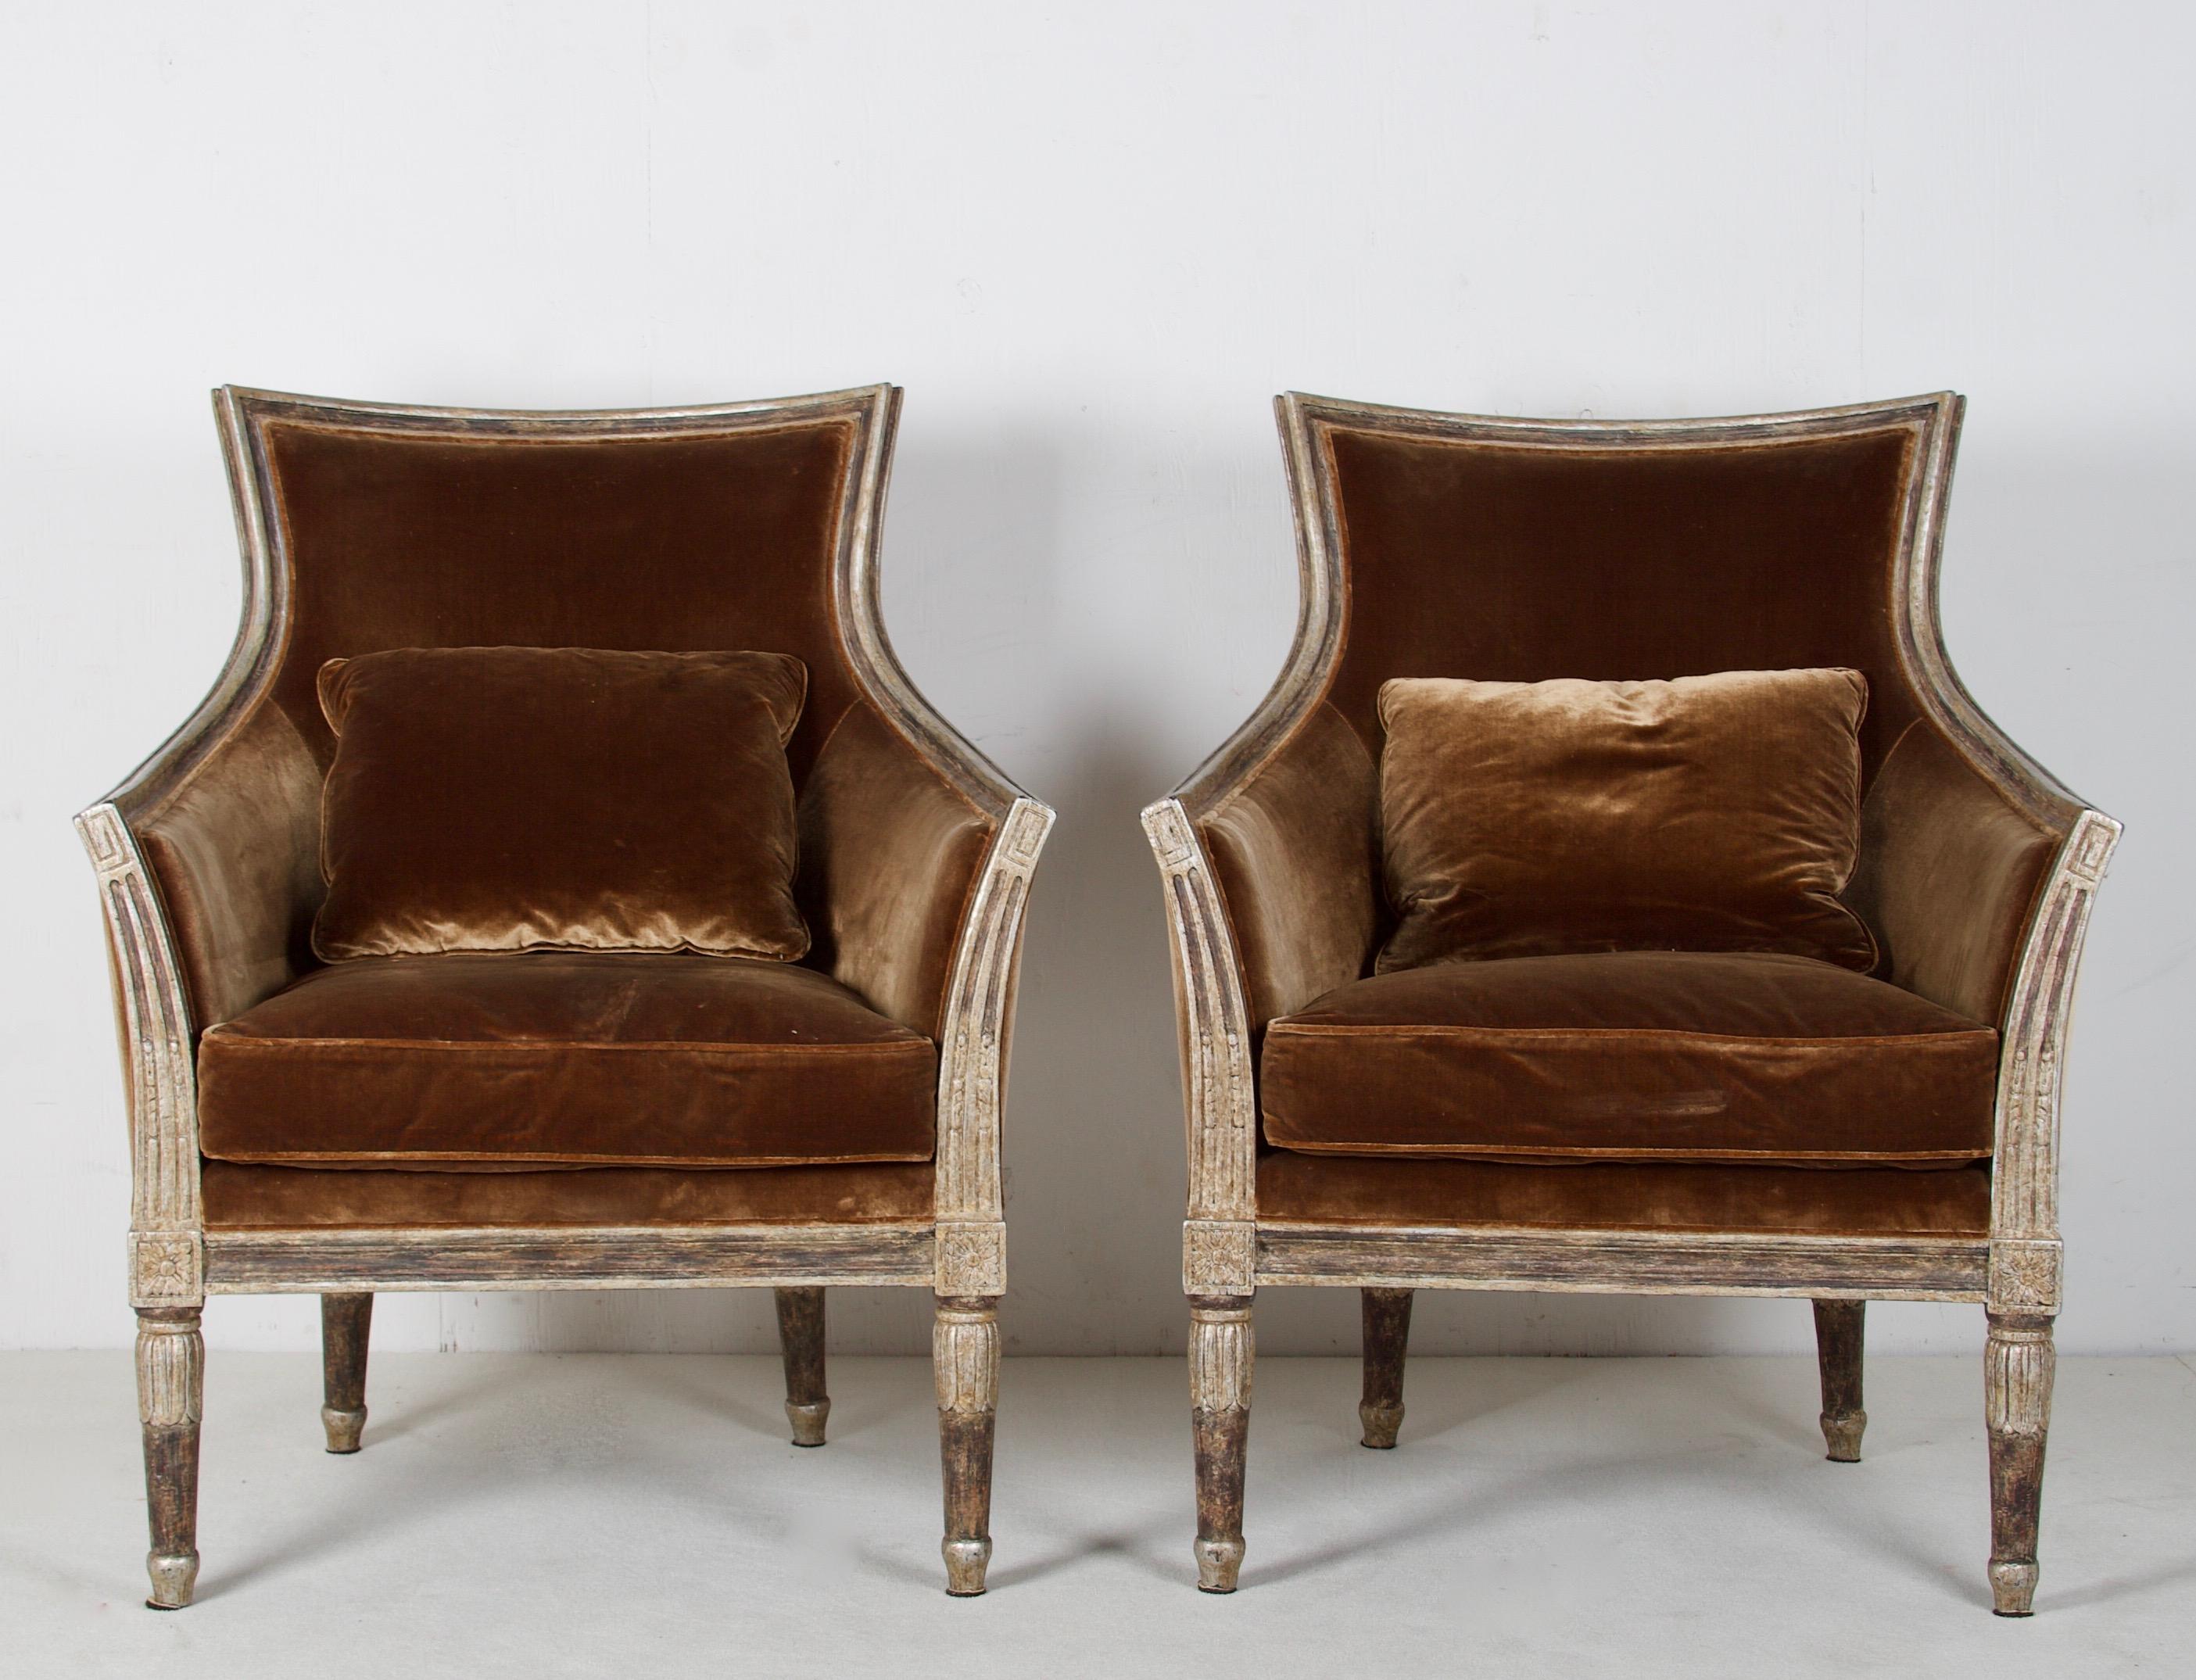 A fine pair of neoclassic style reproduction chairs, upholstered in lovely silk velvet.
The chairs have a painted and white gold water-gilded finish, which is distessed and glazed to appear old. The seat is deep and comfortable. The silk velvet is